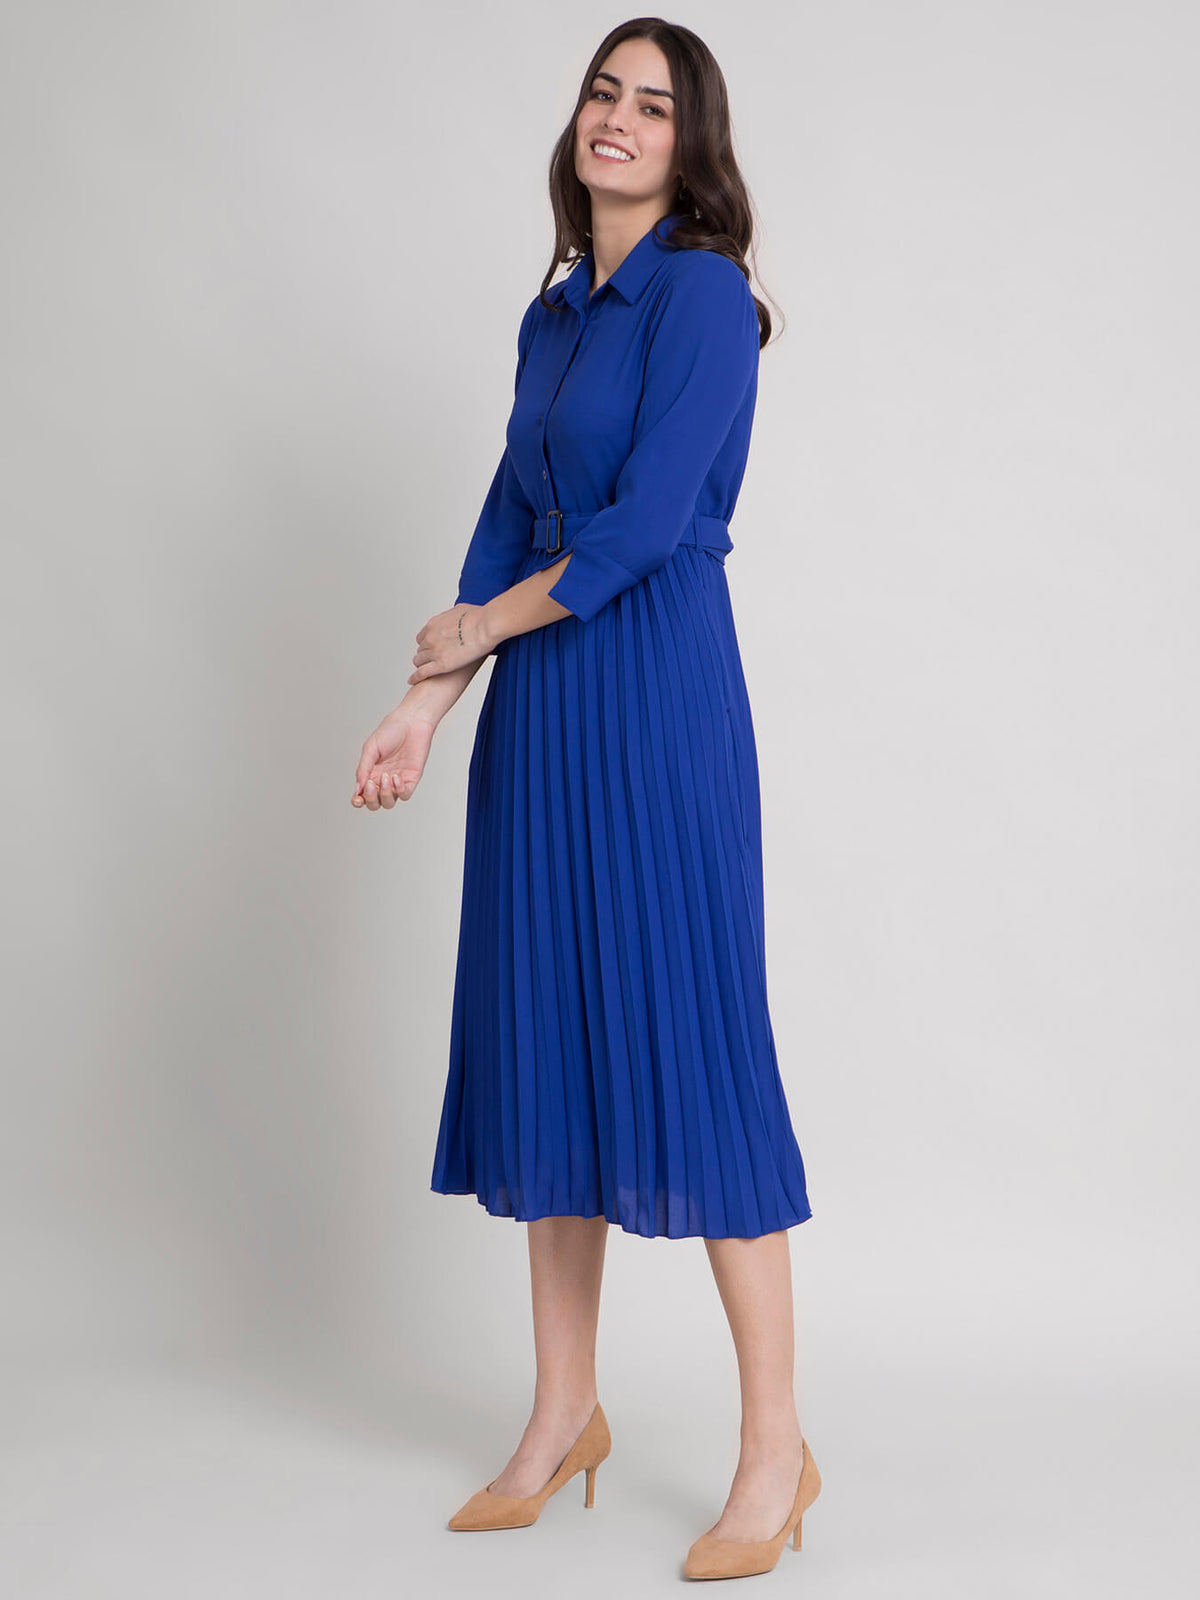 Collared Pleated Fit and Flare Dress - Royal Blue